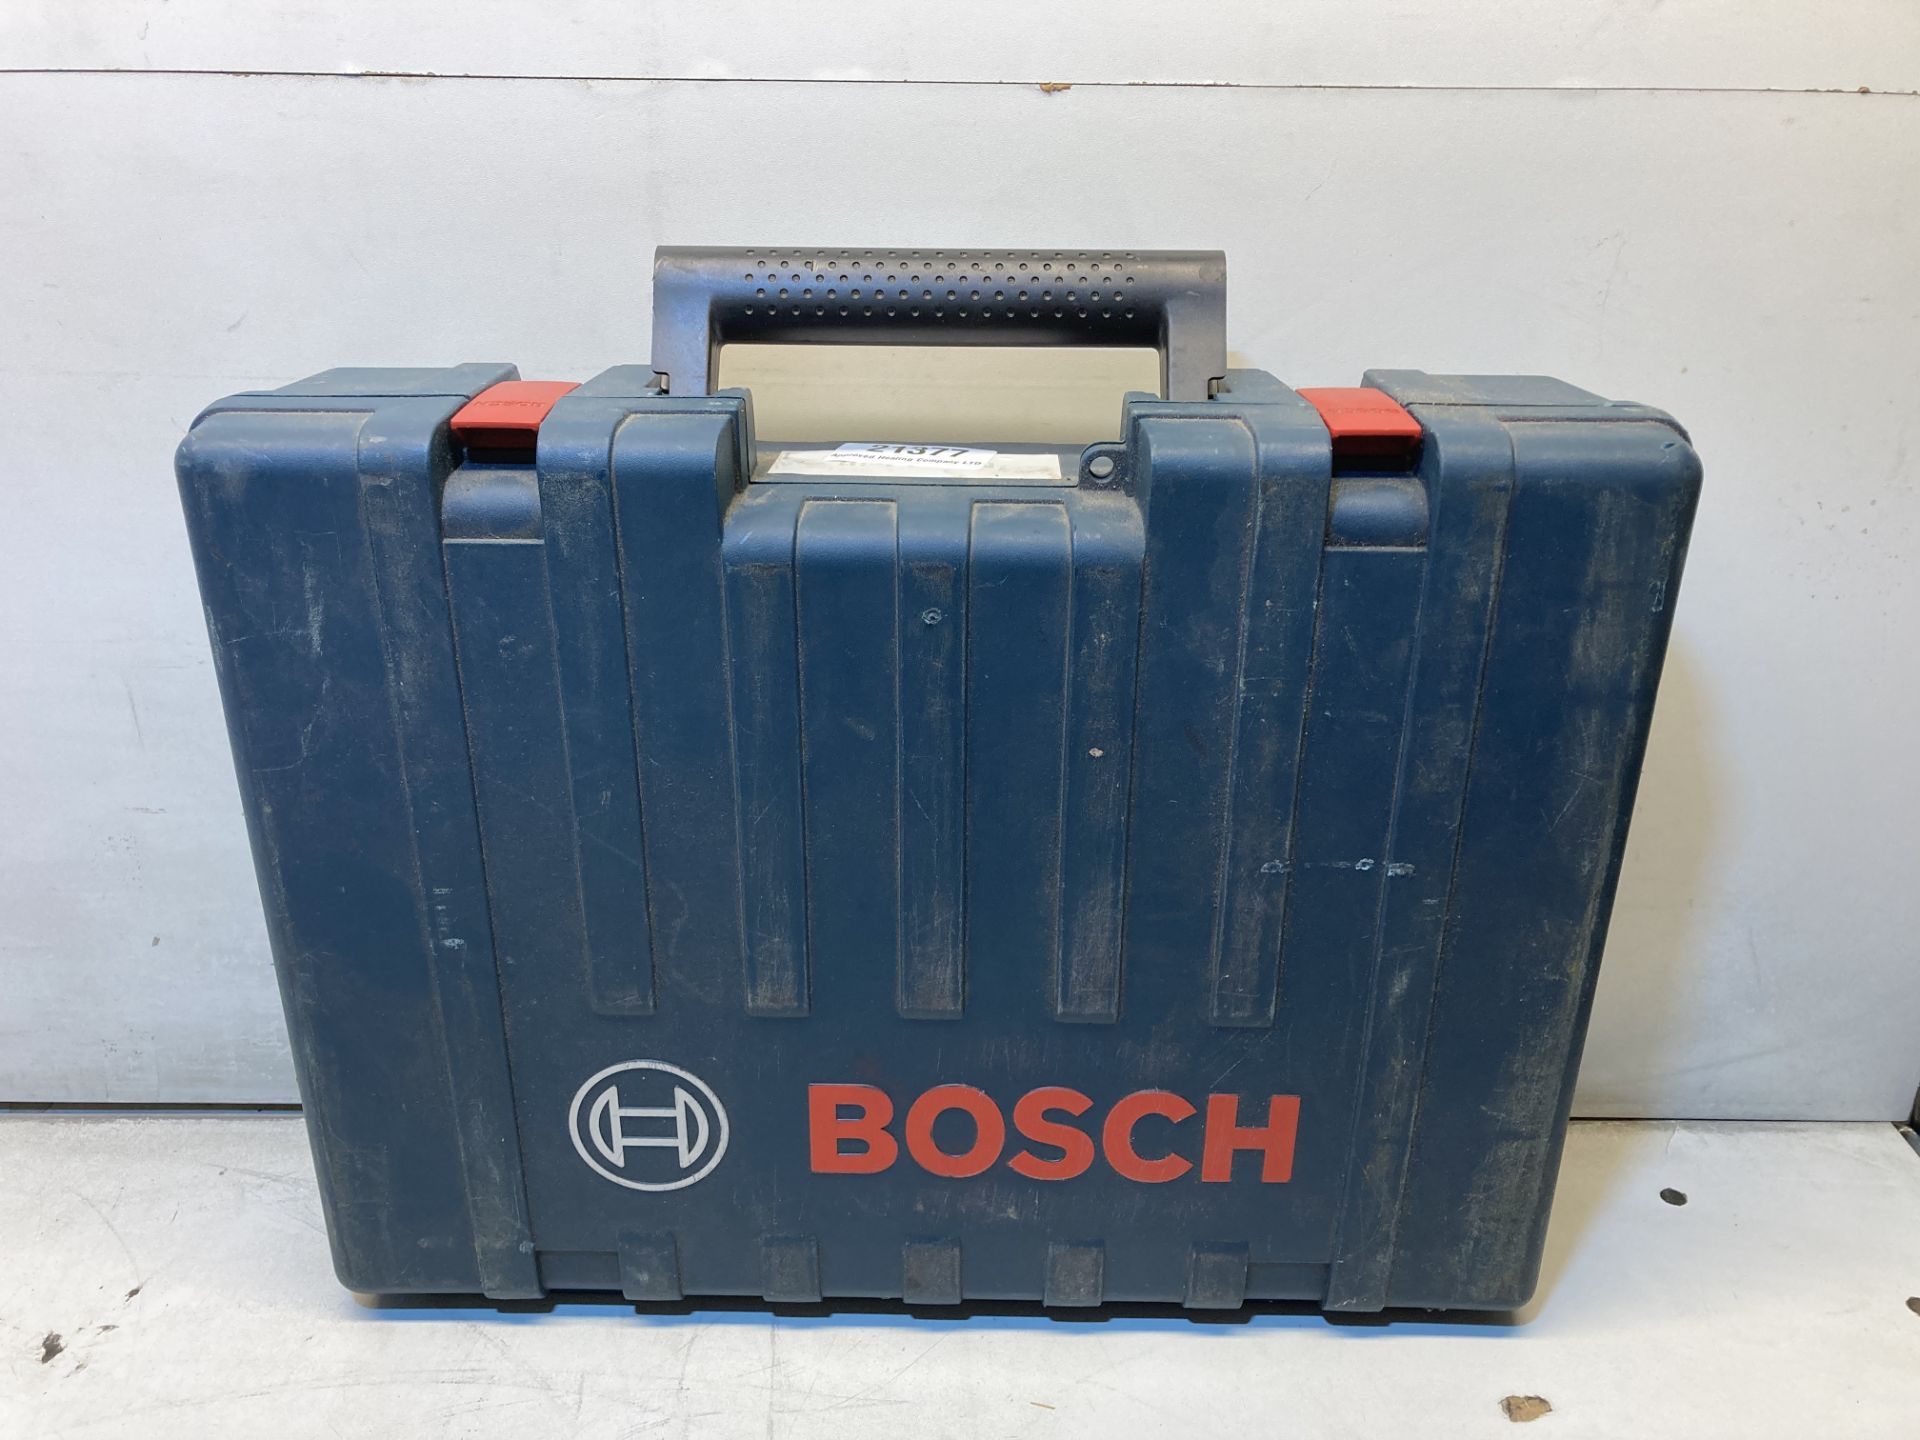 Bosch GBH 4-32 DFR Professional Rotary Hammer Drill W/ Case & Accessories| 110v - Image 5 of 5